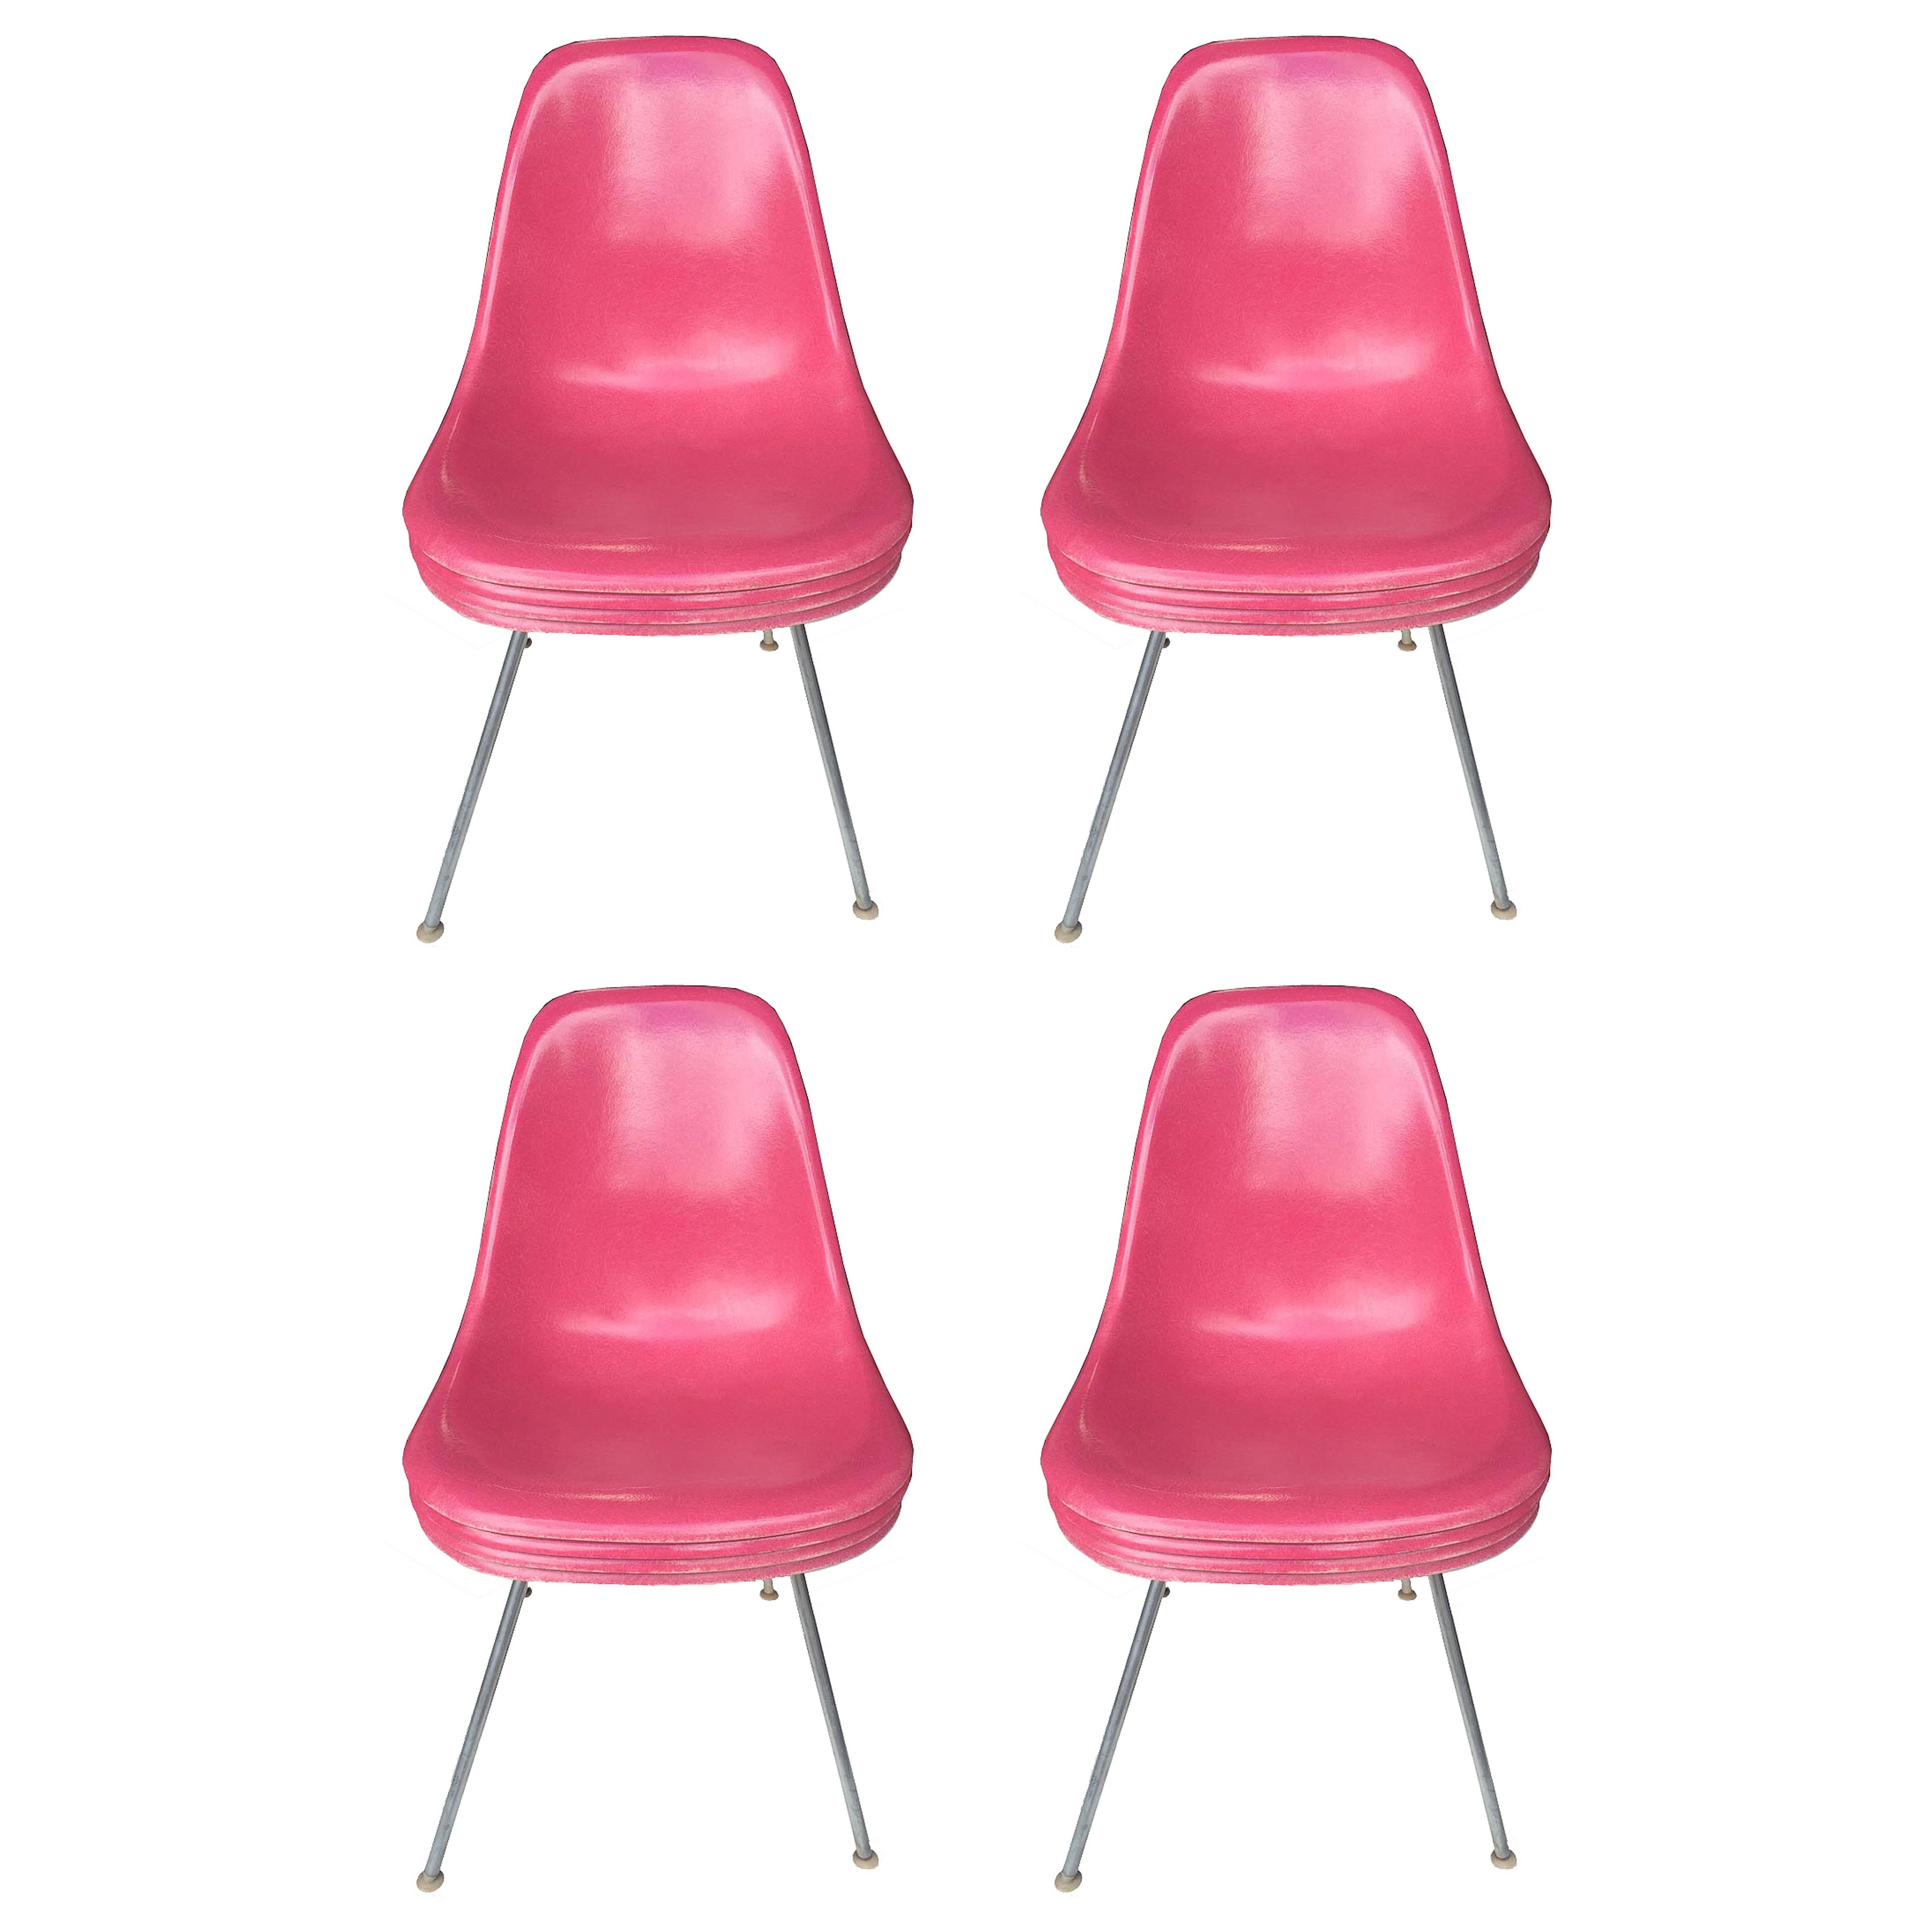 Four Herman Miller Eames Rare Pink Chairs